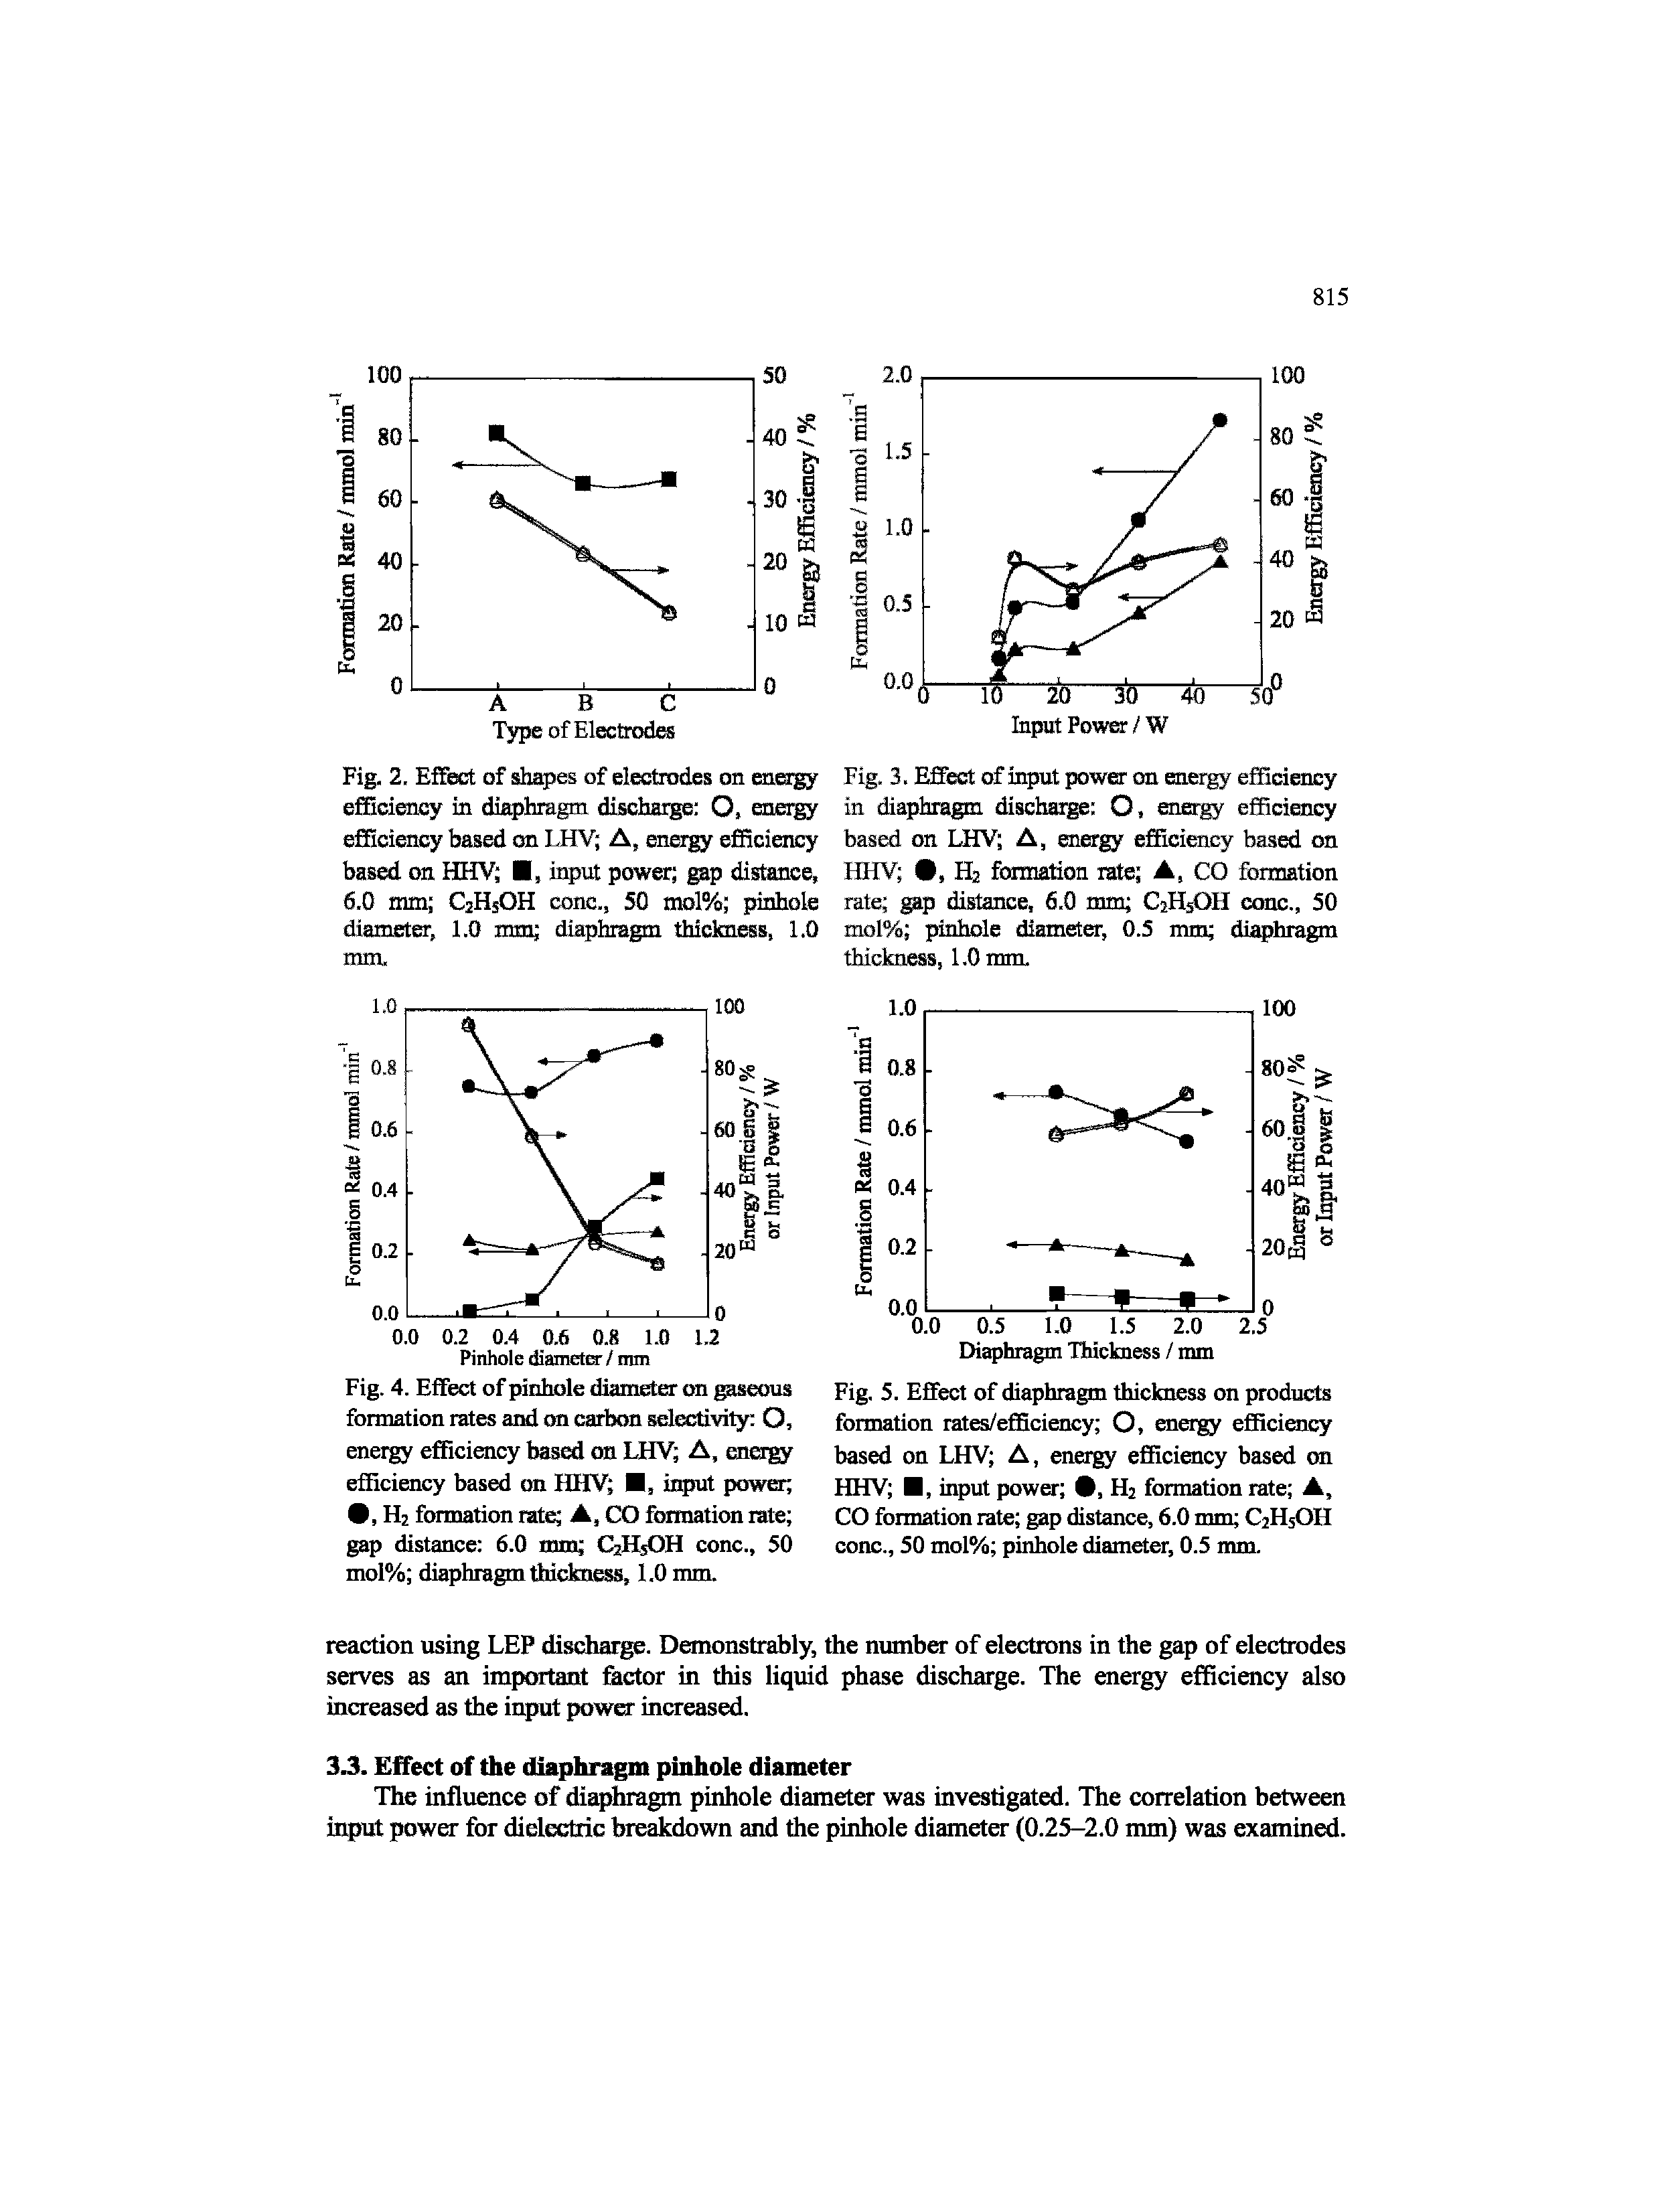 Fig. 4. Effect of pinluile diameter on gaseous formation rates ai on carbon selectivity O, energy efficiency basal on LHV A, aietgy efficiency based on HHV , uqnit power 9, H2 formation rate A, CO formation rate gap distaiKe 6.0 mm QjHsOH cone., 50 mol% diaphragm fhickness, 1.0 mm.